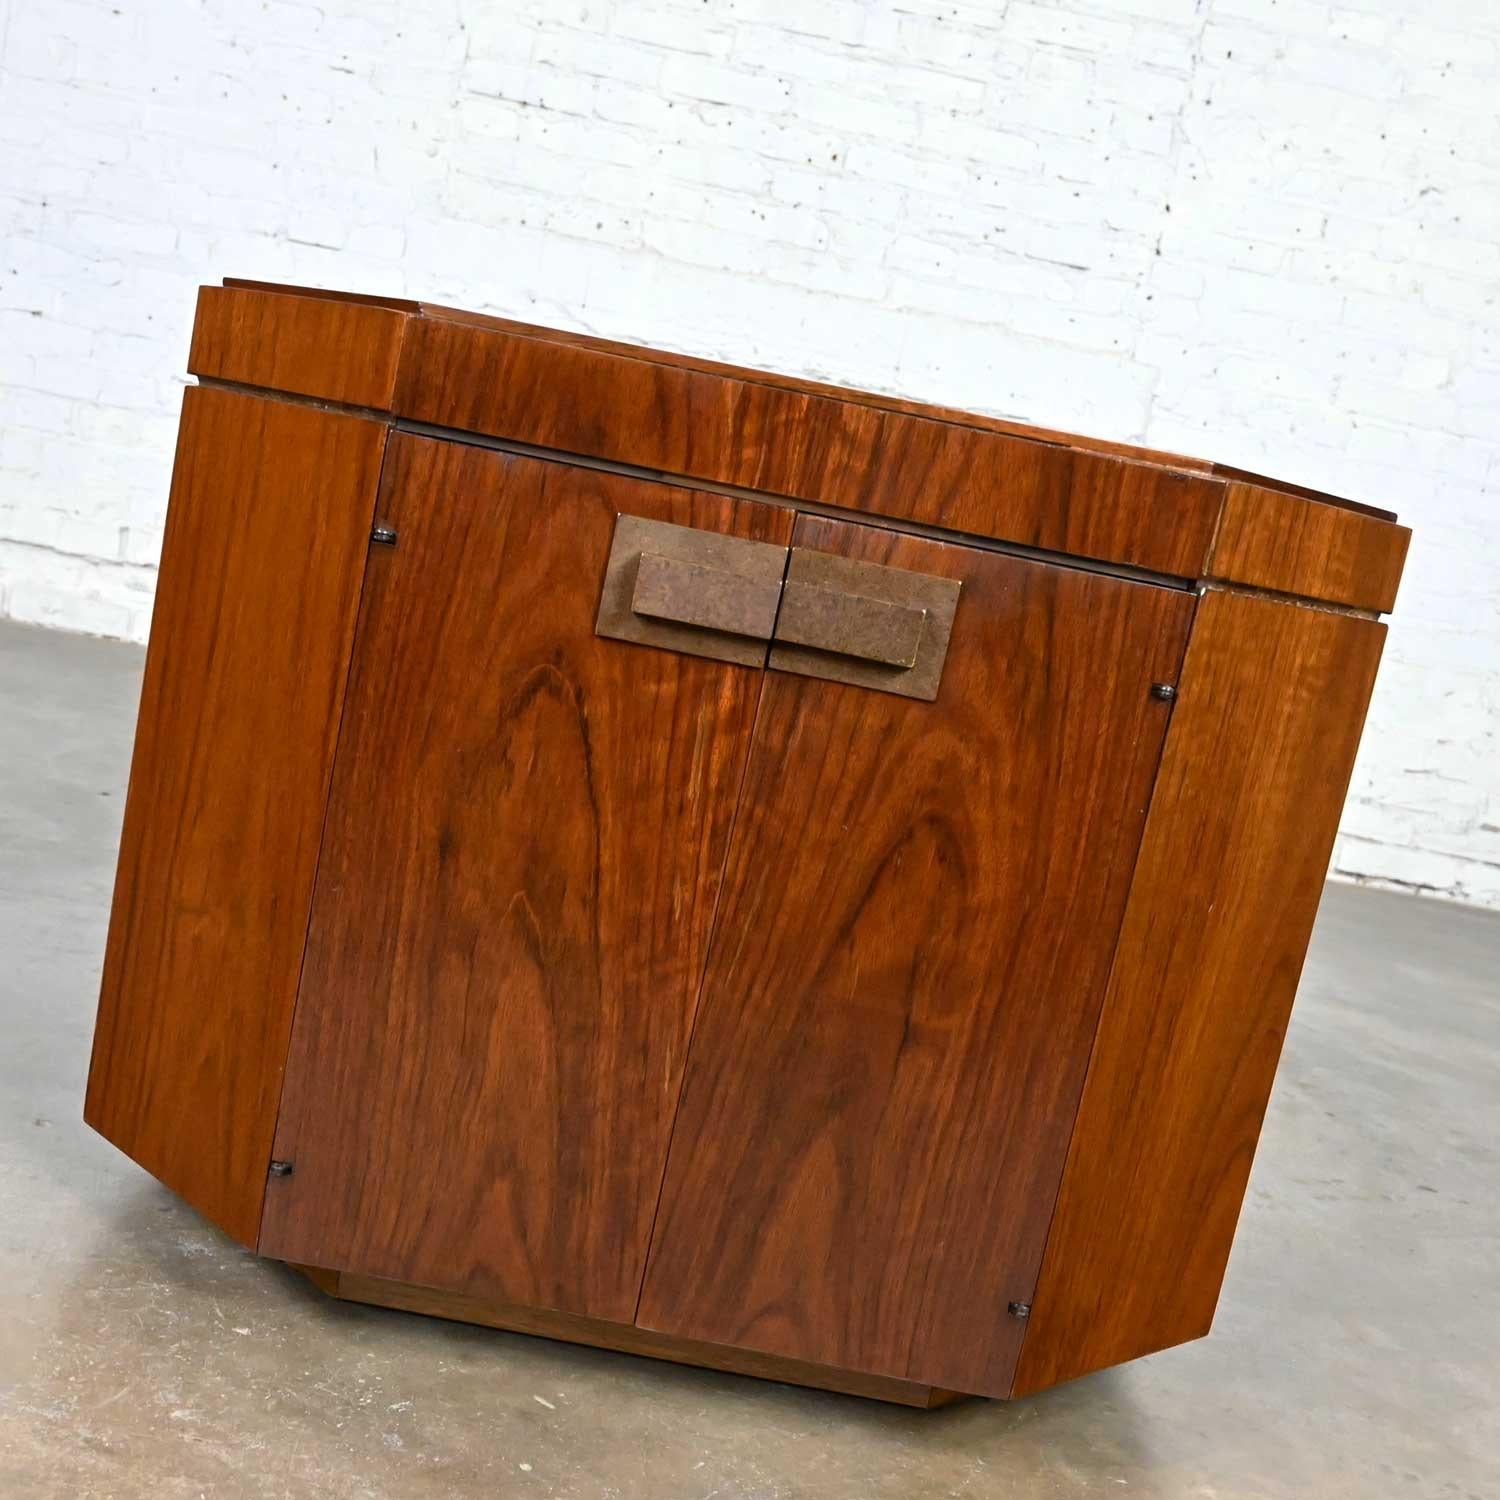 Wonderful MCM (a.k.a. Mid-Century Modern) to Modern Founders Furniture octagon commode table or end table cabinet #21135 Patterns 21 in solid Mozambique veneer & brass hardware. This piece still has its original hang tag. Beautiful condition,